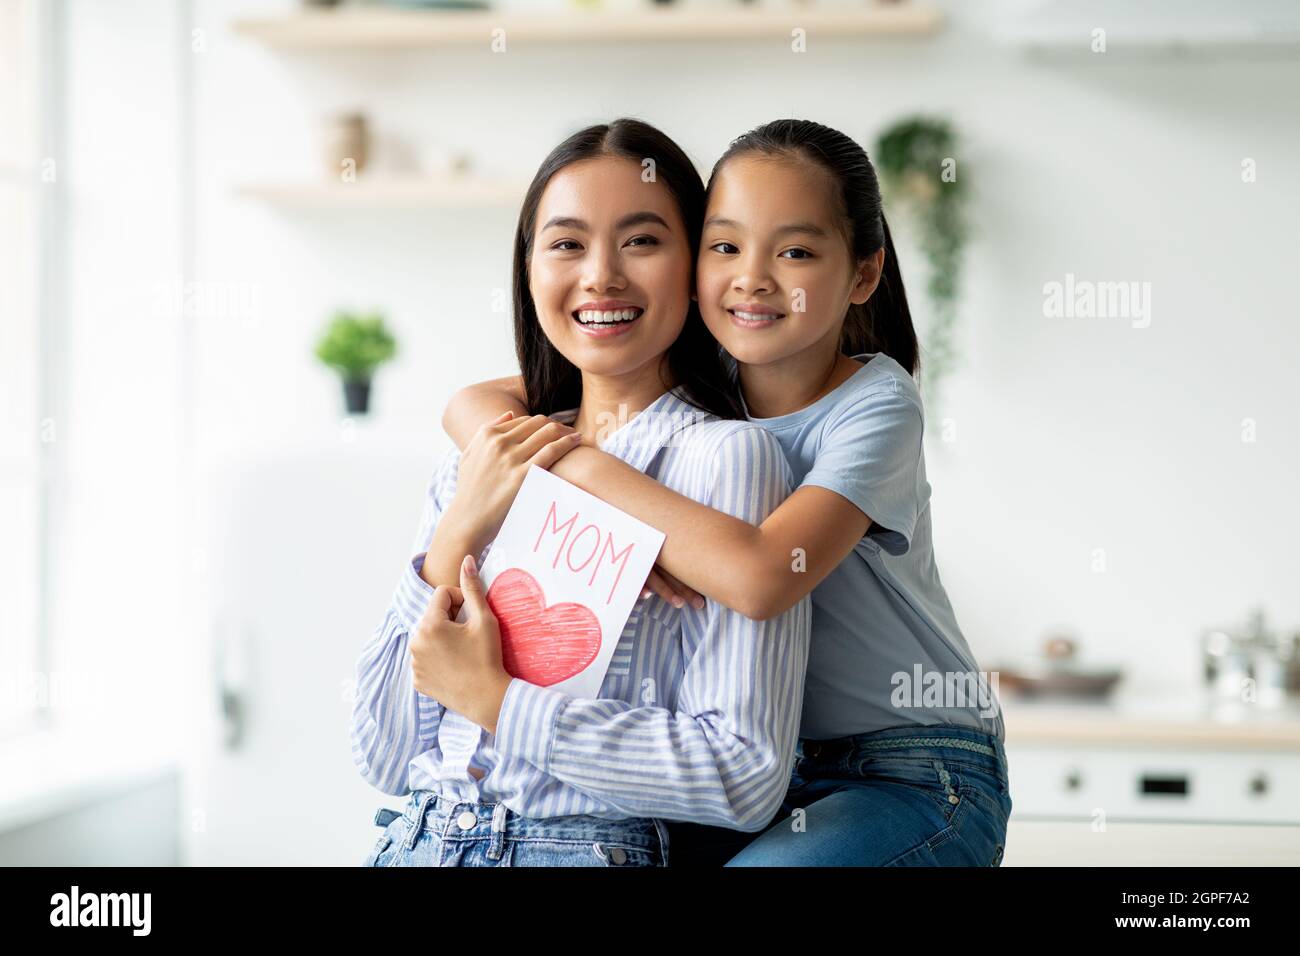 https://c8.alamy.com/comp/2GPF7A2/pretty-asian-girl-greeting-mom-with-mothers-day-daughter-with-handmade-gift-card-embracing-her-mother-from-back-2GPF7A2.jpg